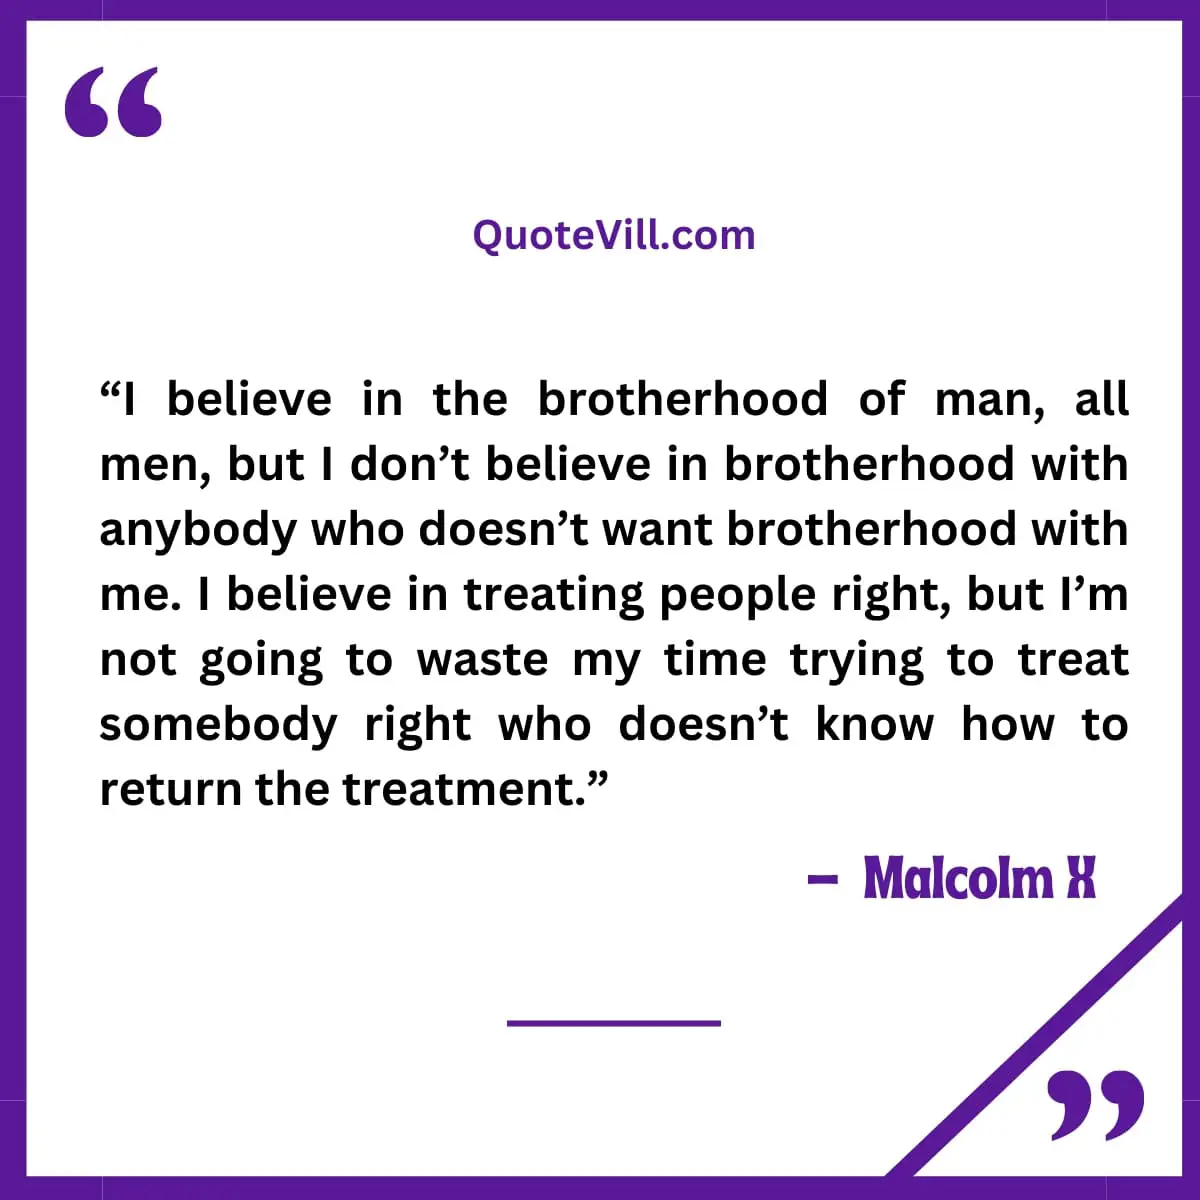 Malcolm X Quotes On Respect And Equality